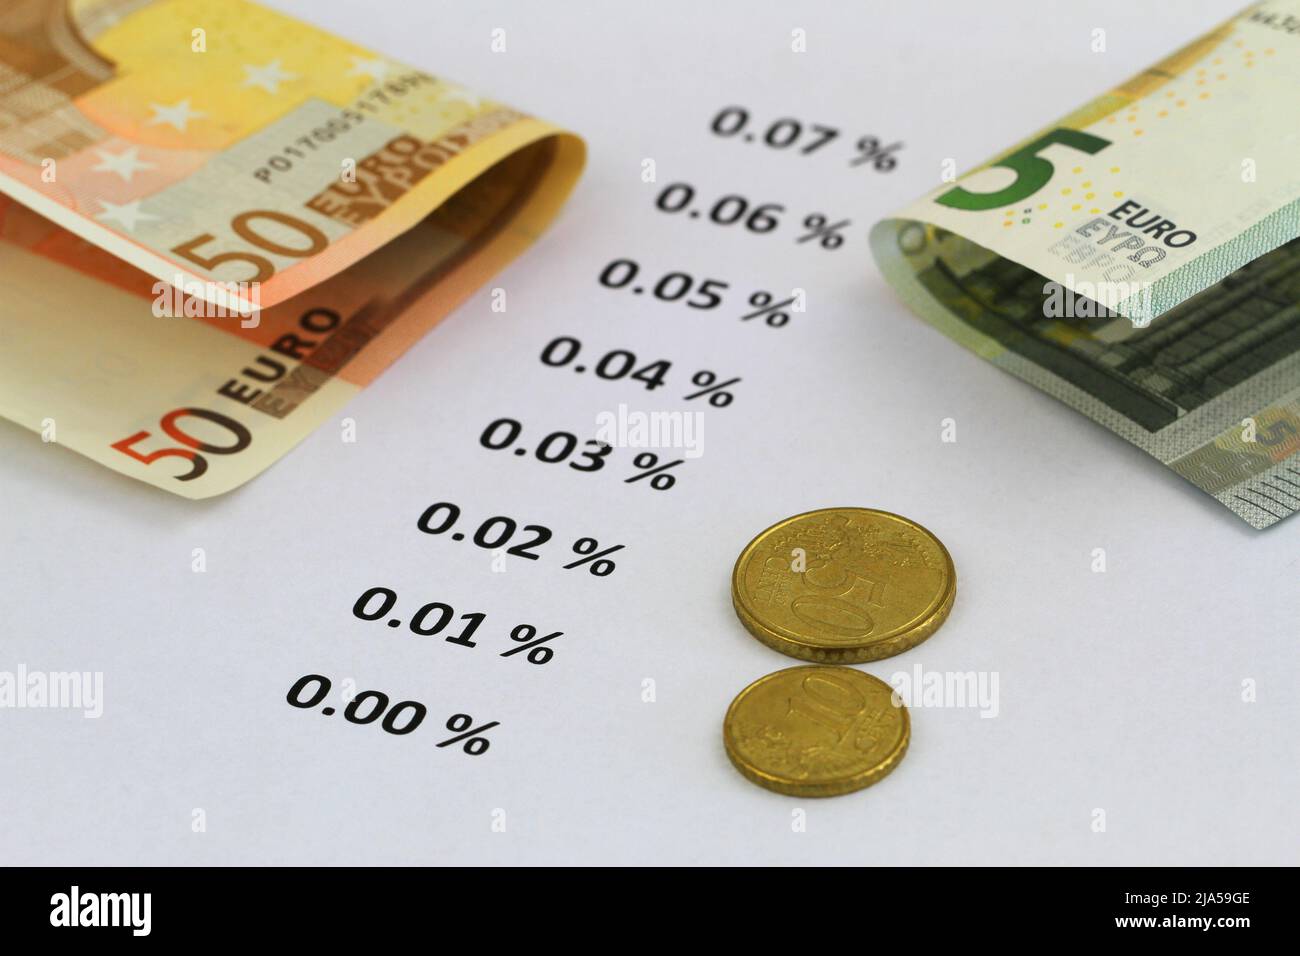 Interest rates printed on white paper with EUR banknotes and coins Stock Photo